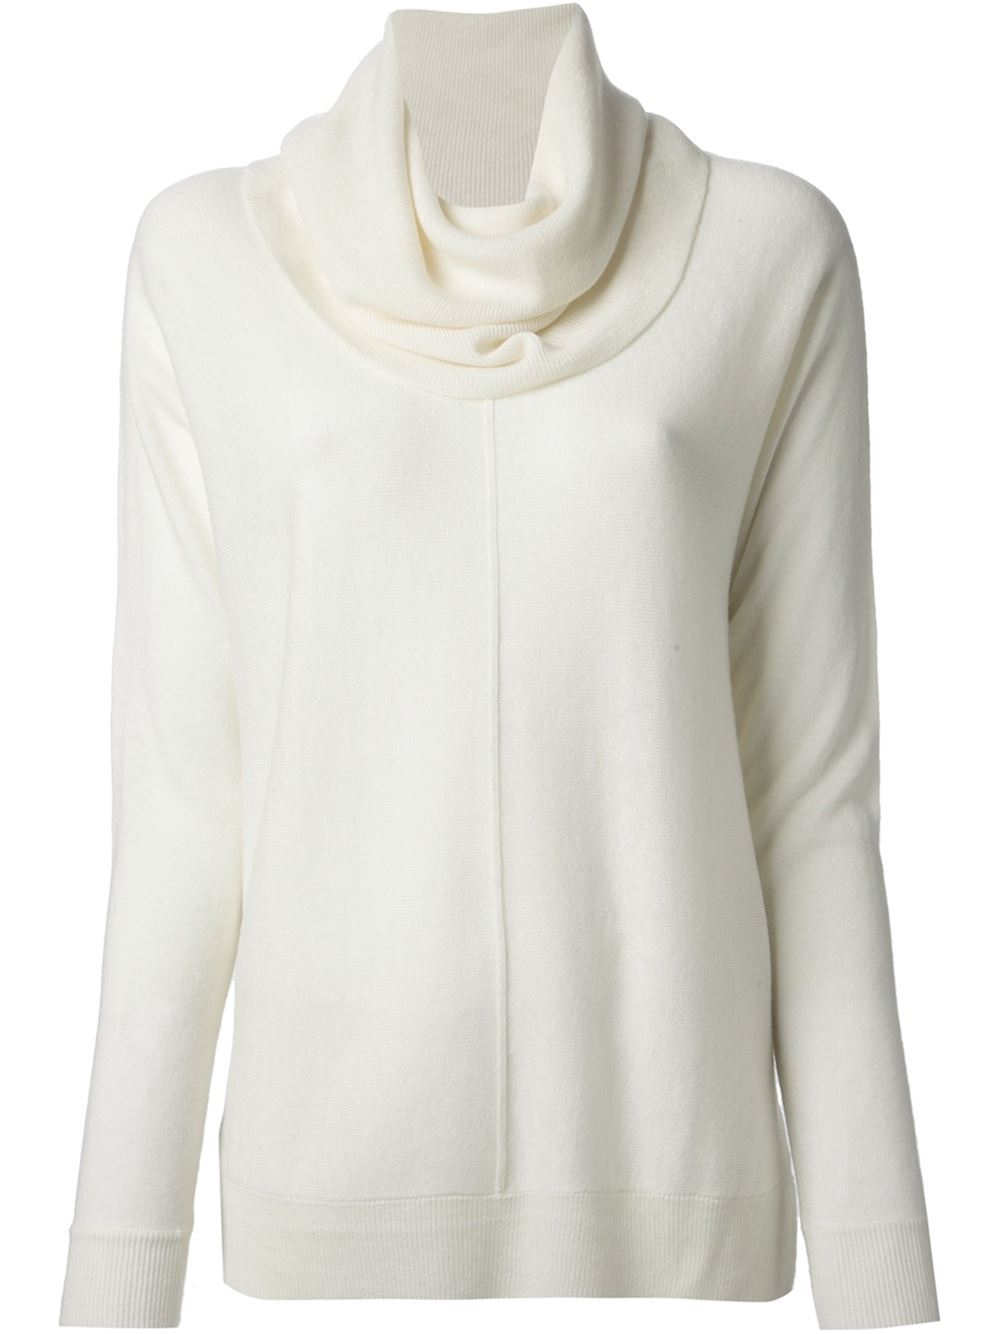 Lyst - Vince Cowl Neck Sweater in White